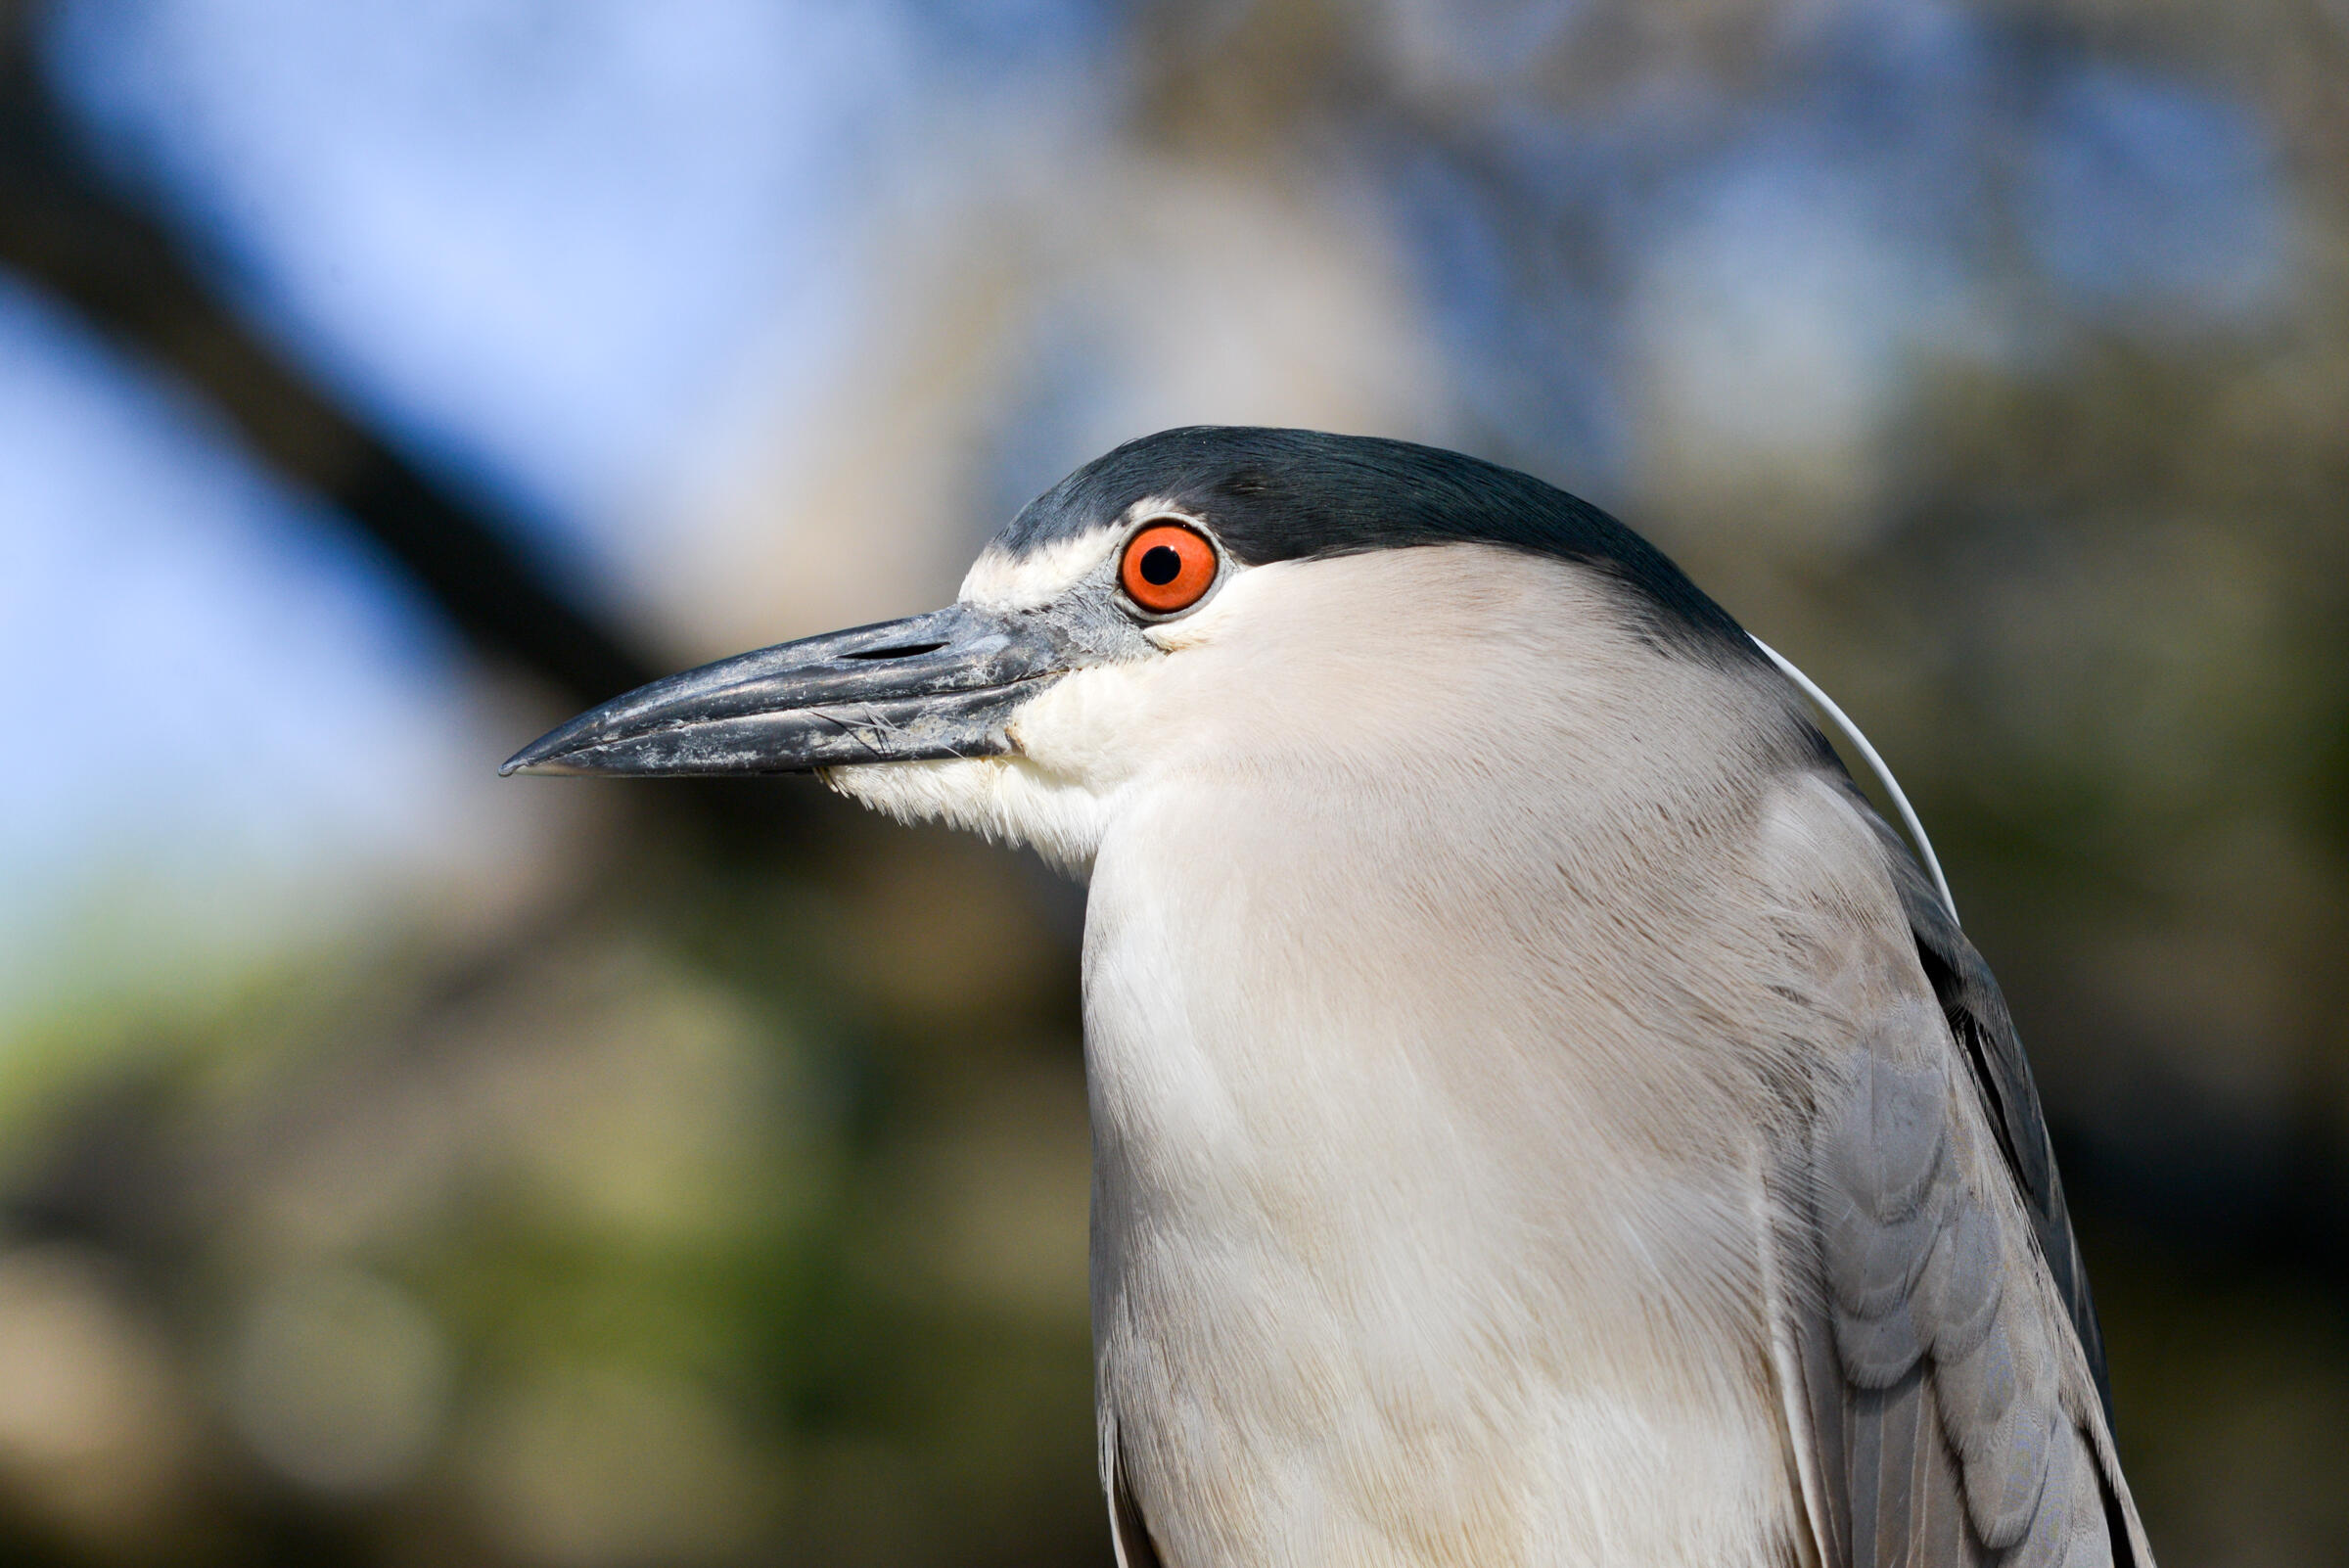 Black-crowned Night Heron "headshot," the bird is looking to its right and we can clearly see its red-orange eye.